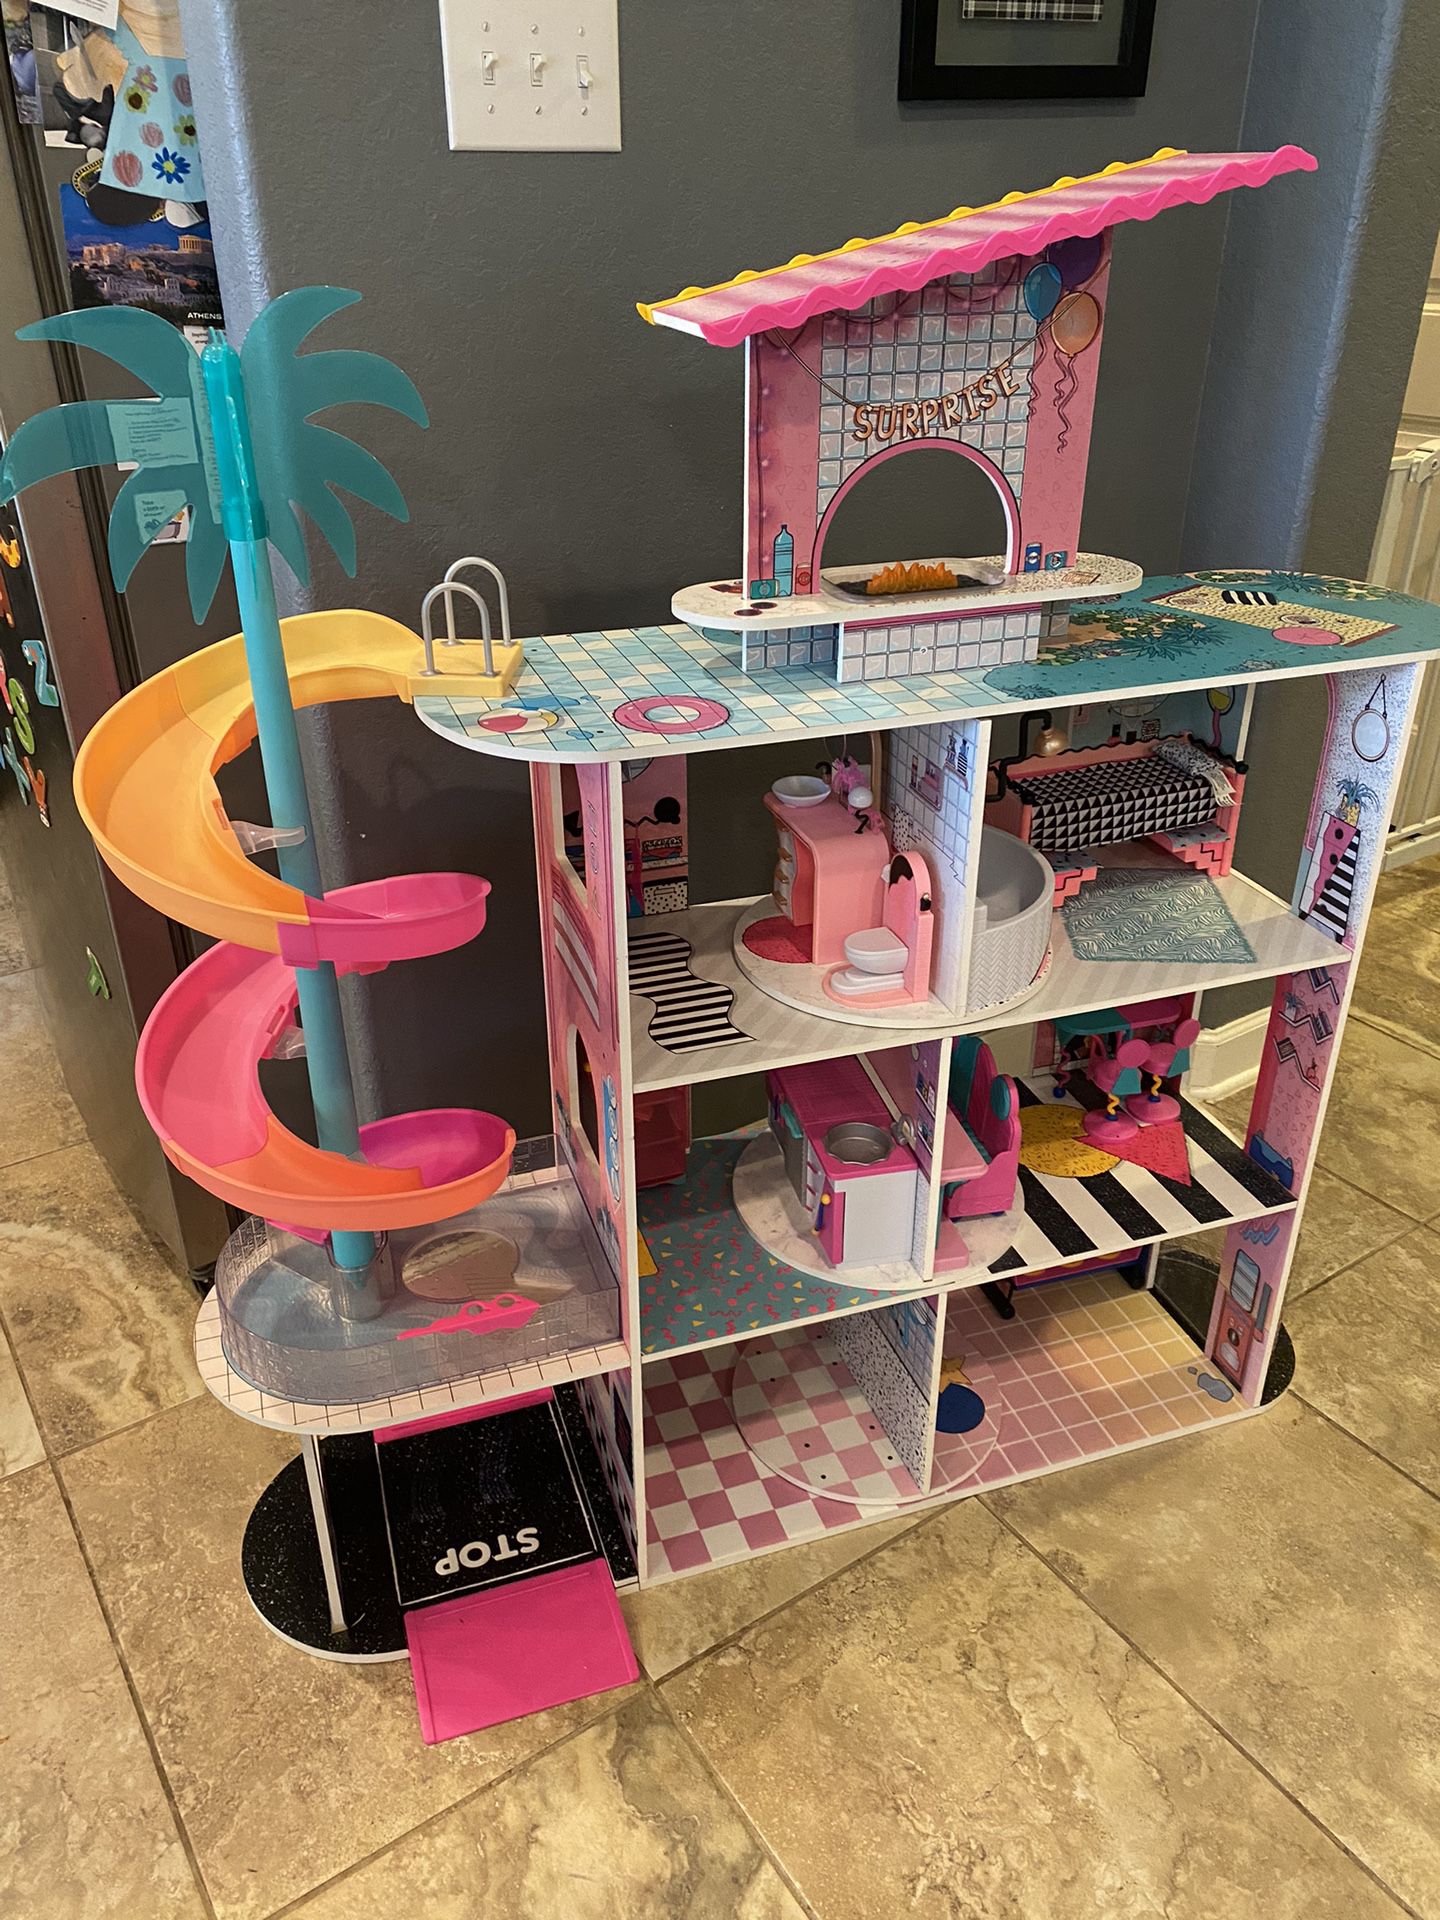 L.O.L. OMG Fashion Doll House Playset + 2 Bonus Rooms (cafe And Boutique)